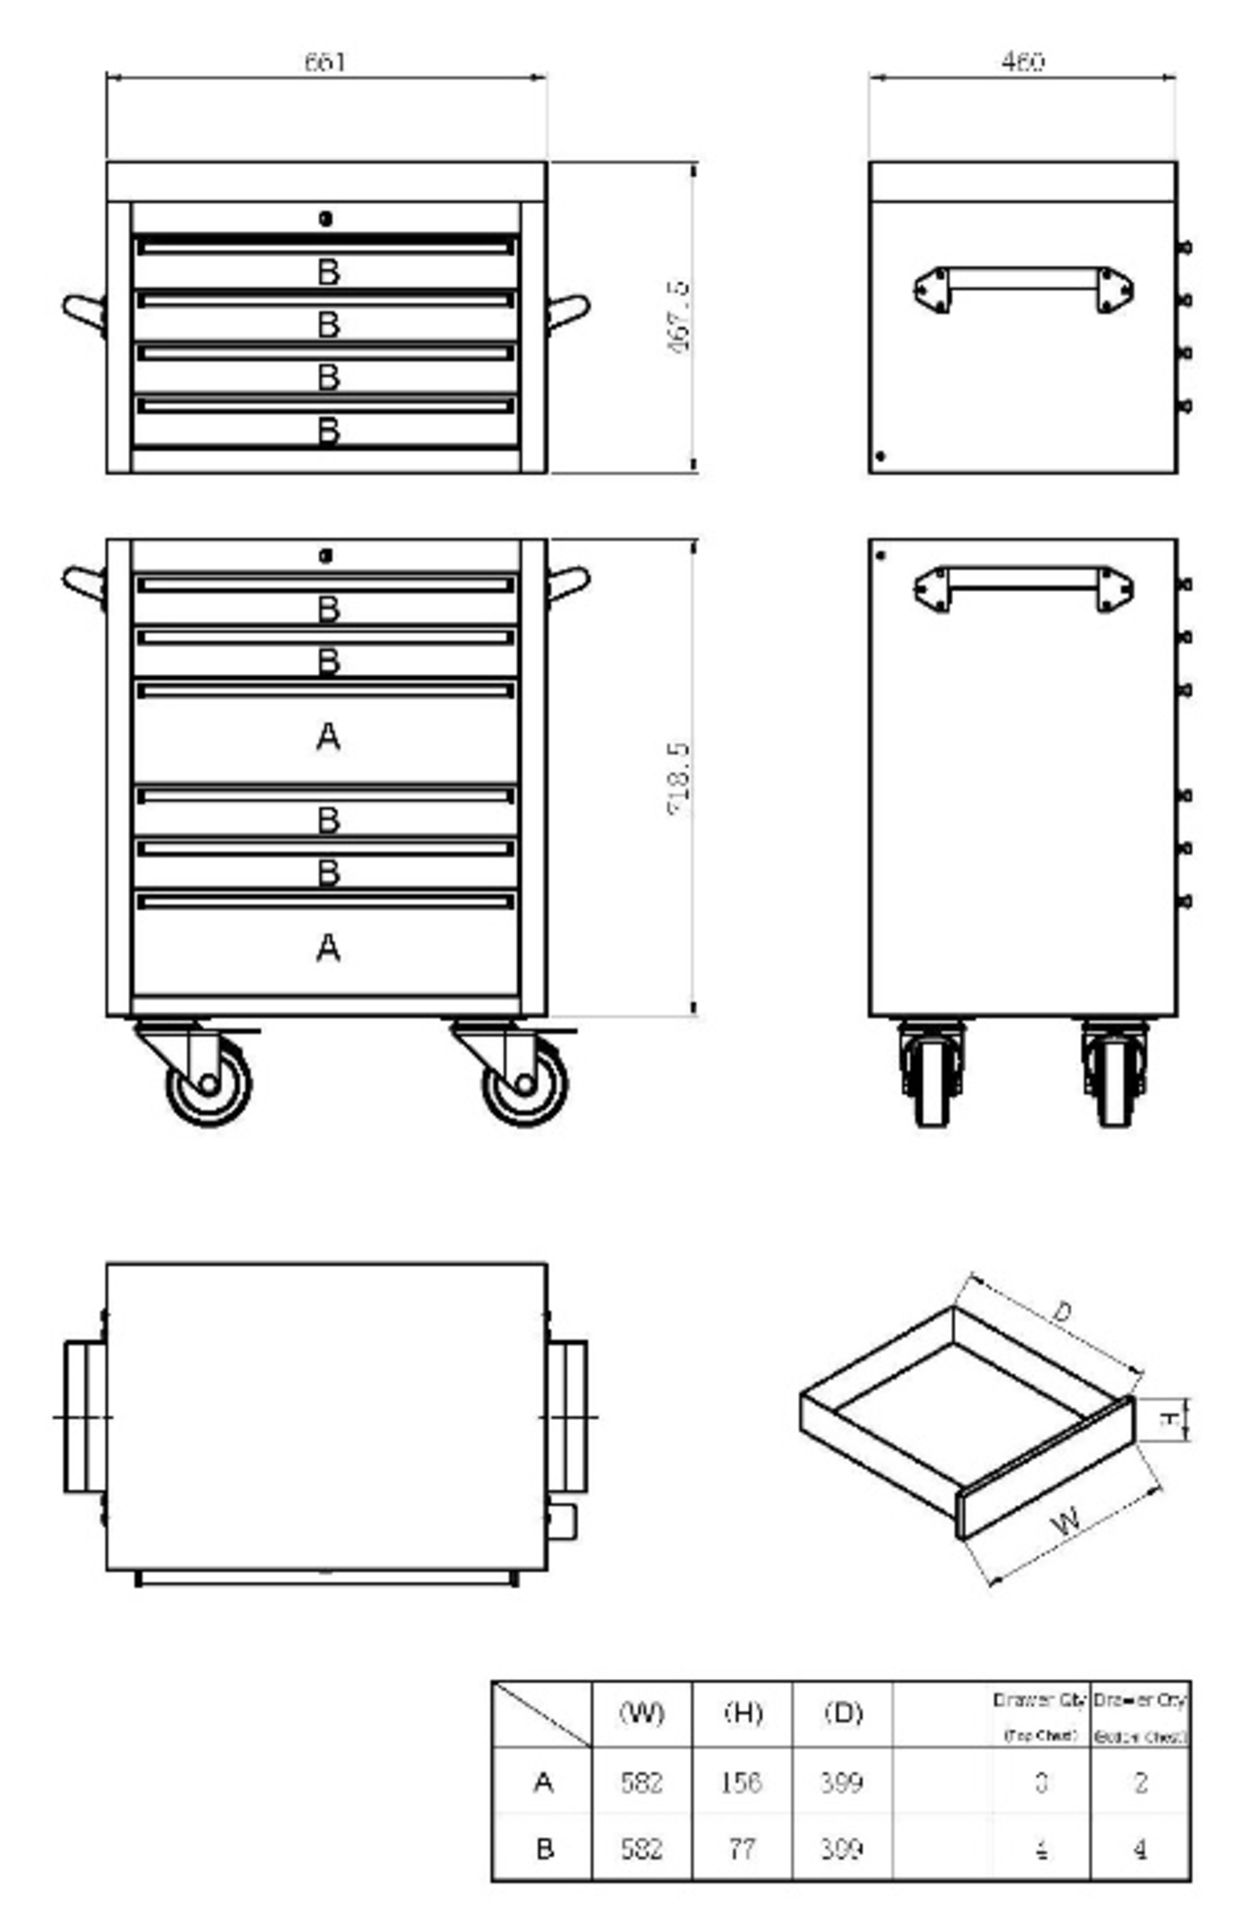 10 units x 26 inch 10 draw stainless steel storage unit 661mm W x 1280mm H 460mm D NEW and BOXED - Image 2 of 2